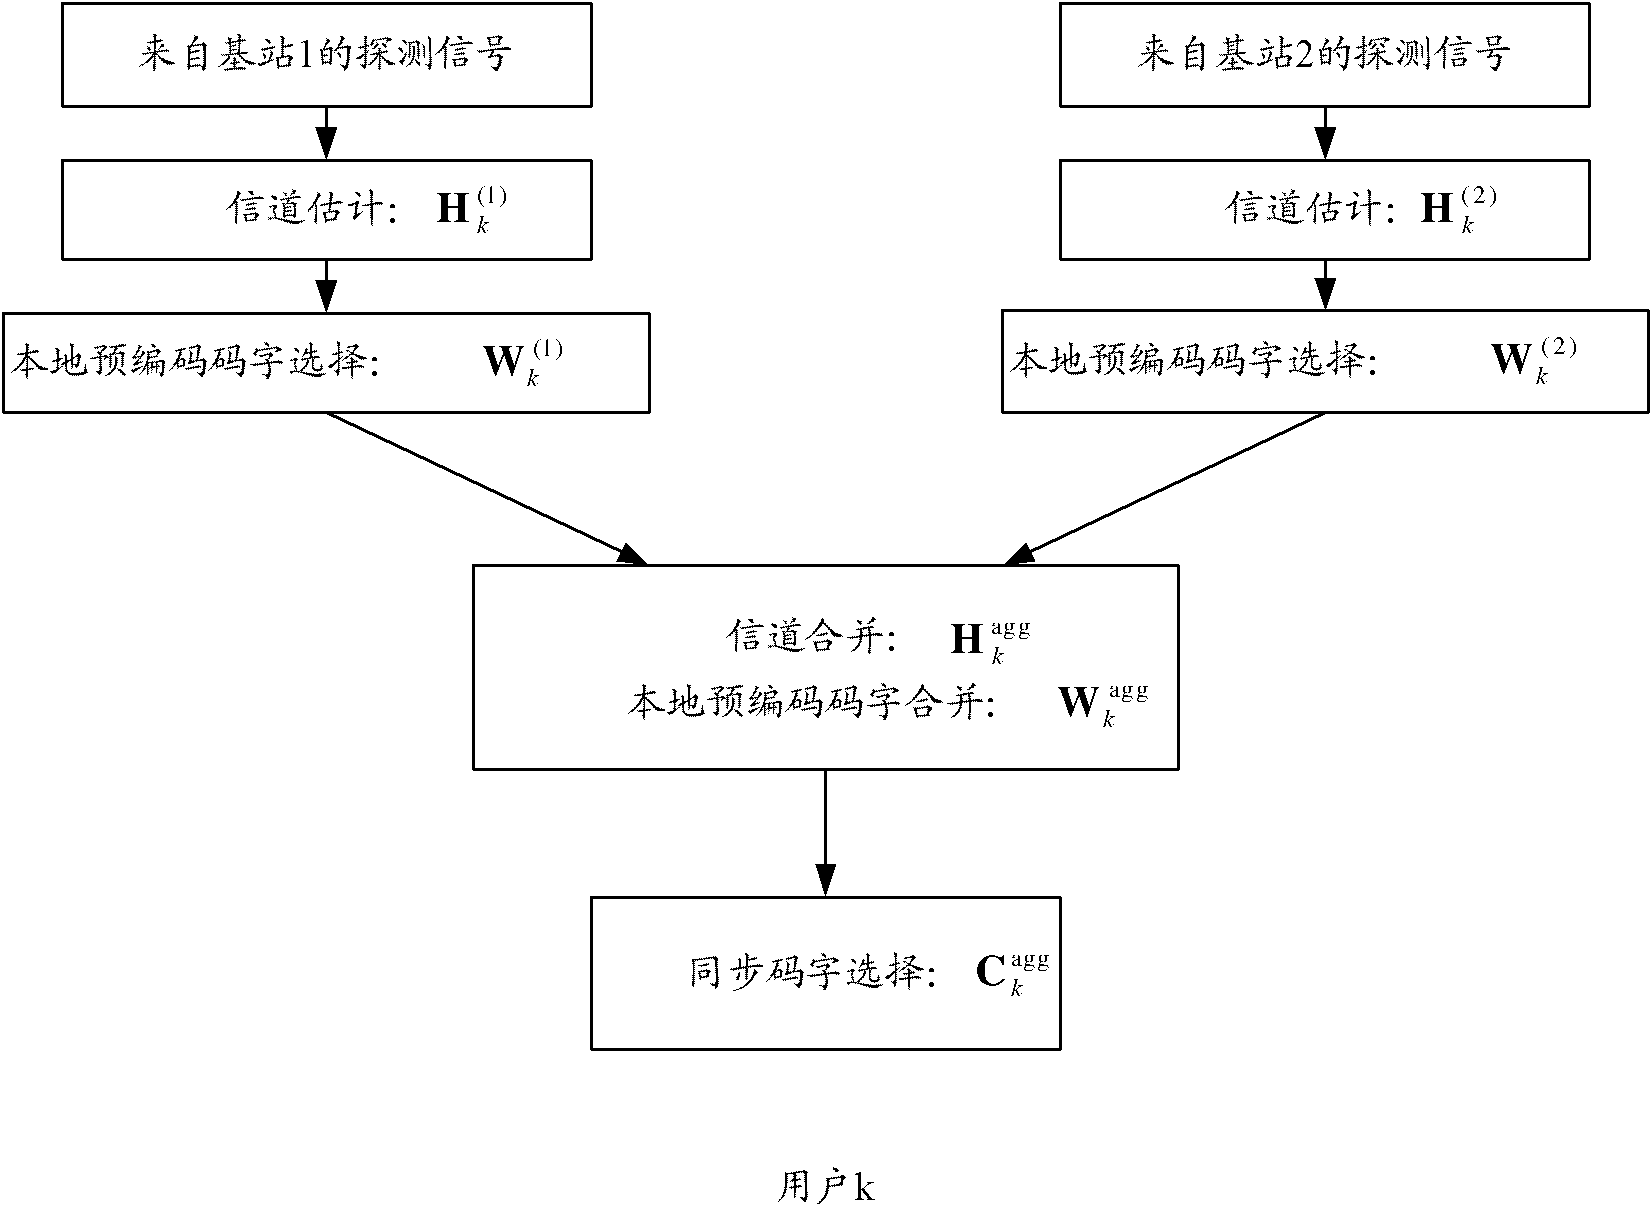 Method and system for realizing cooperative precoding